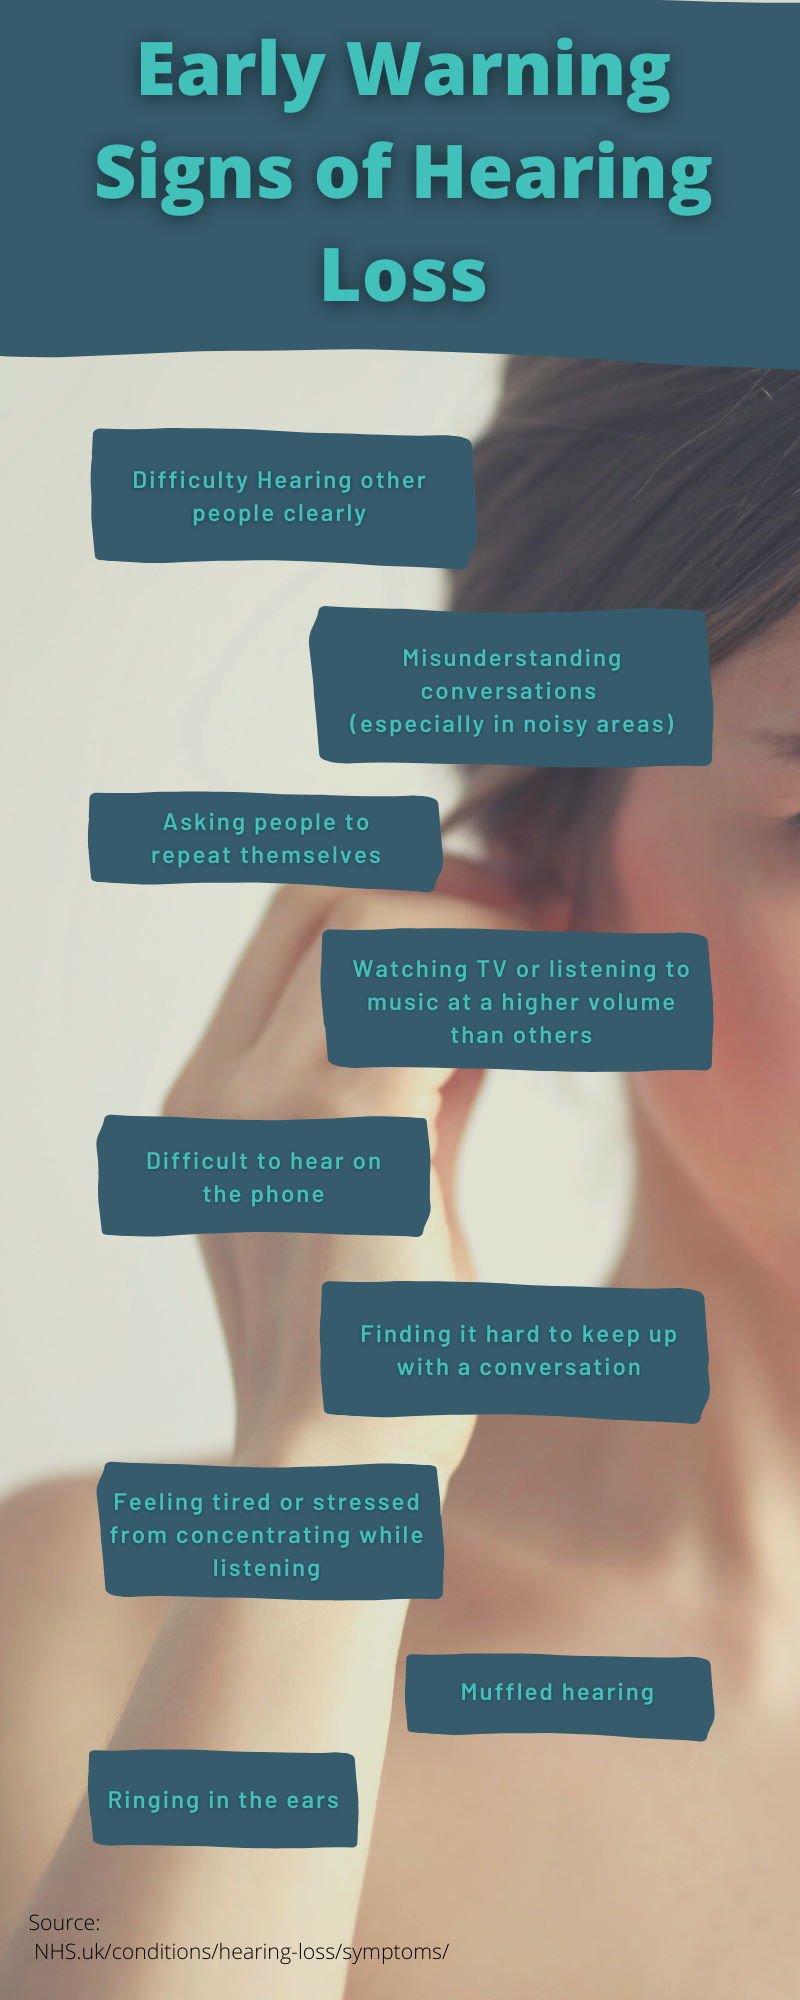 early warning signs of hearing loss infographic: Difficulty hearing other people clearly Misunderstanding conversations (especially in noisy areas) Asking people to repeat themselves Watching TV or listening to music at a higher volume than others Difficult to hear on the phone Finding it hard to keep up with a conversation Feeling tired or stressed from concentrating while listening Muffled hearing Ringing in the ears